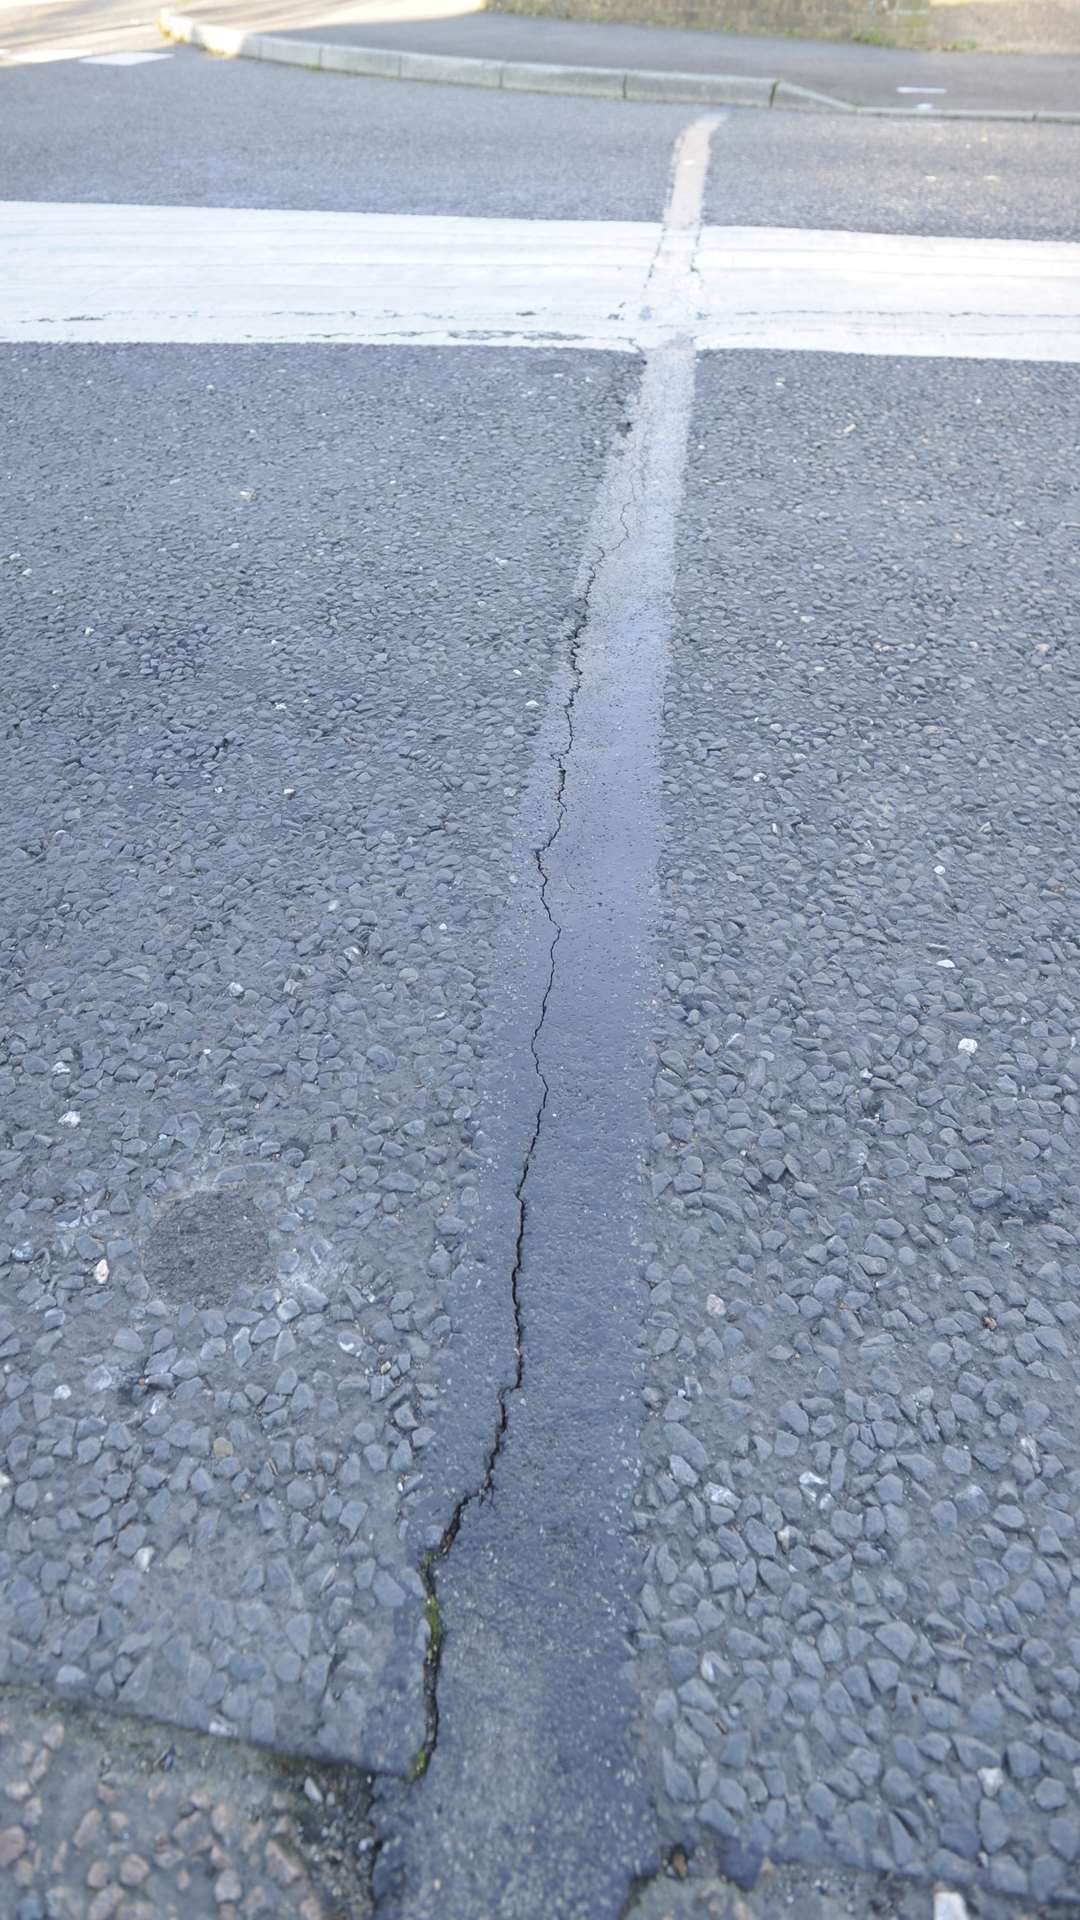 Large cracks have appeared in the road.